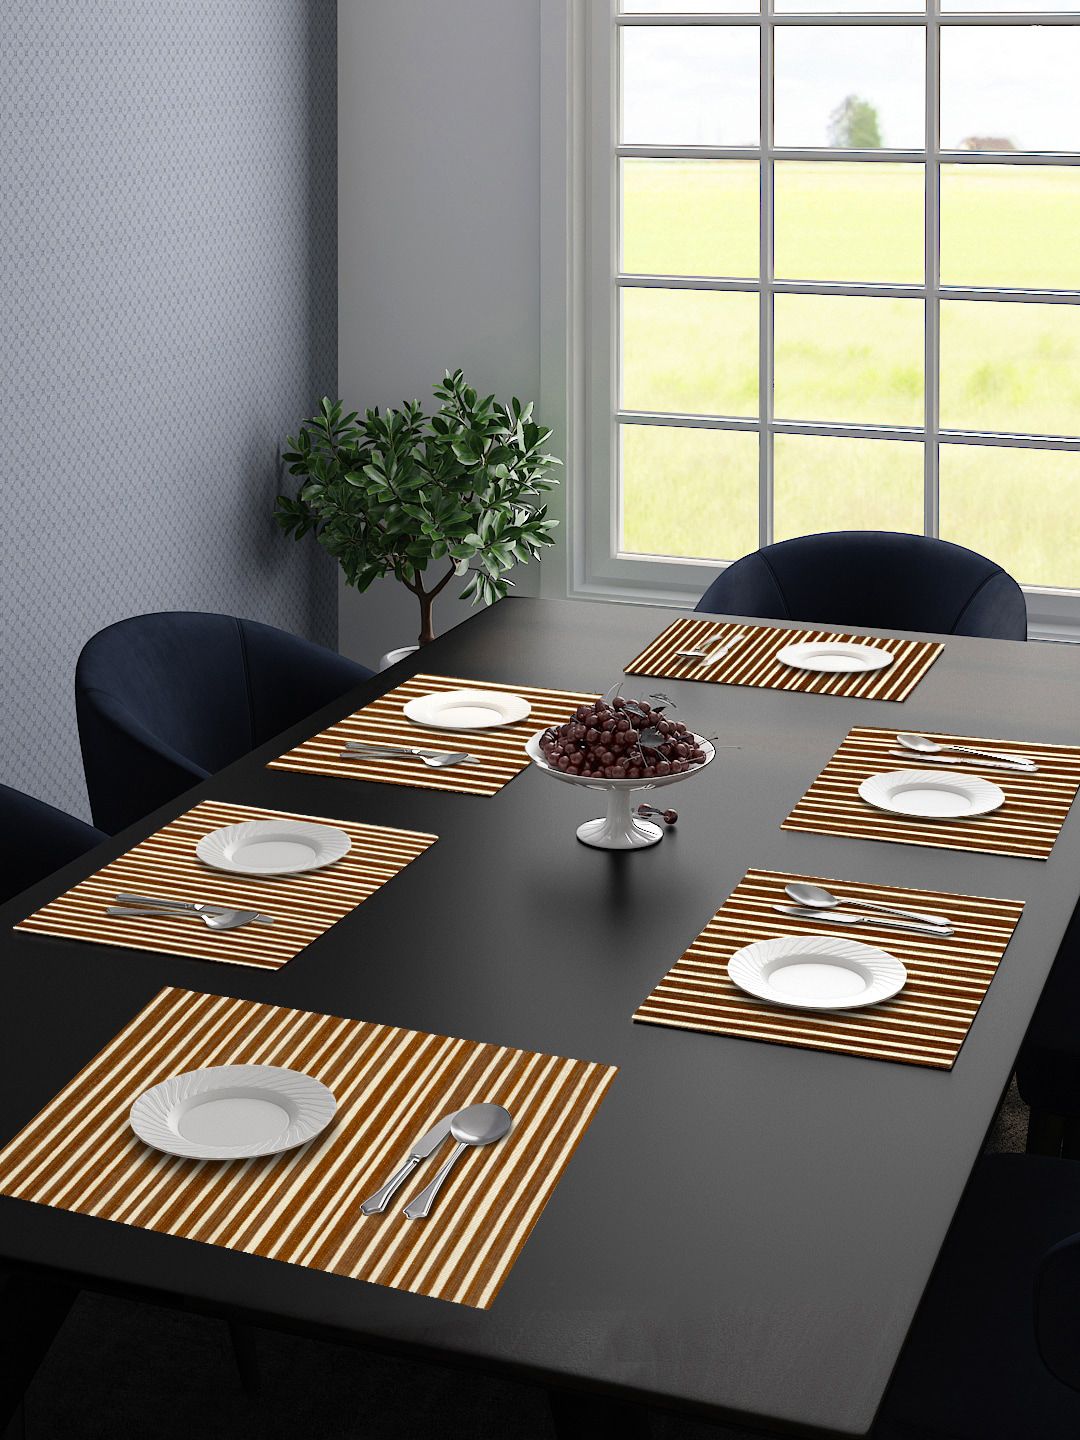 Saral Home Set Of 6 Beige & Brown Striped Table Placemats Price in India